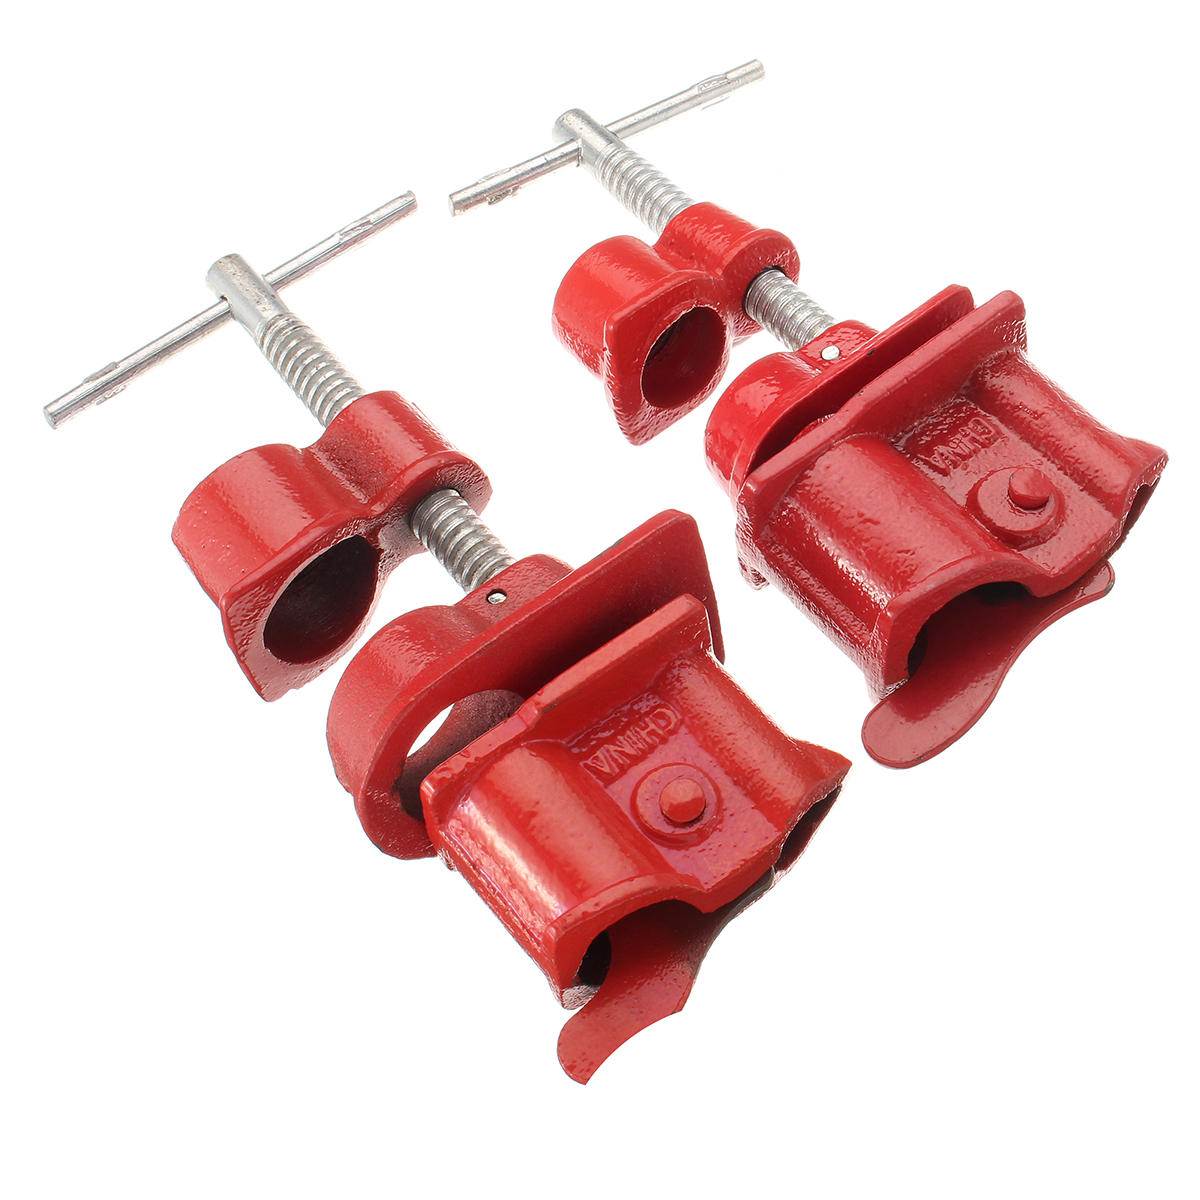 3/4" Wood Gluing Pipe Clamp Set Heavy Duty PRO Woodworking Cast Iron 